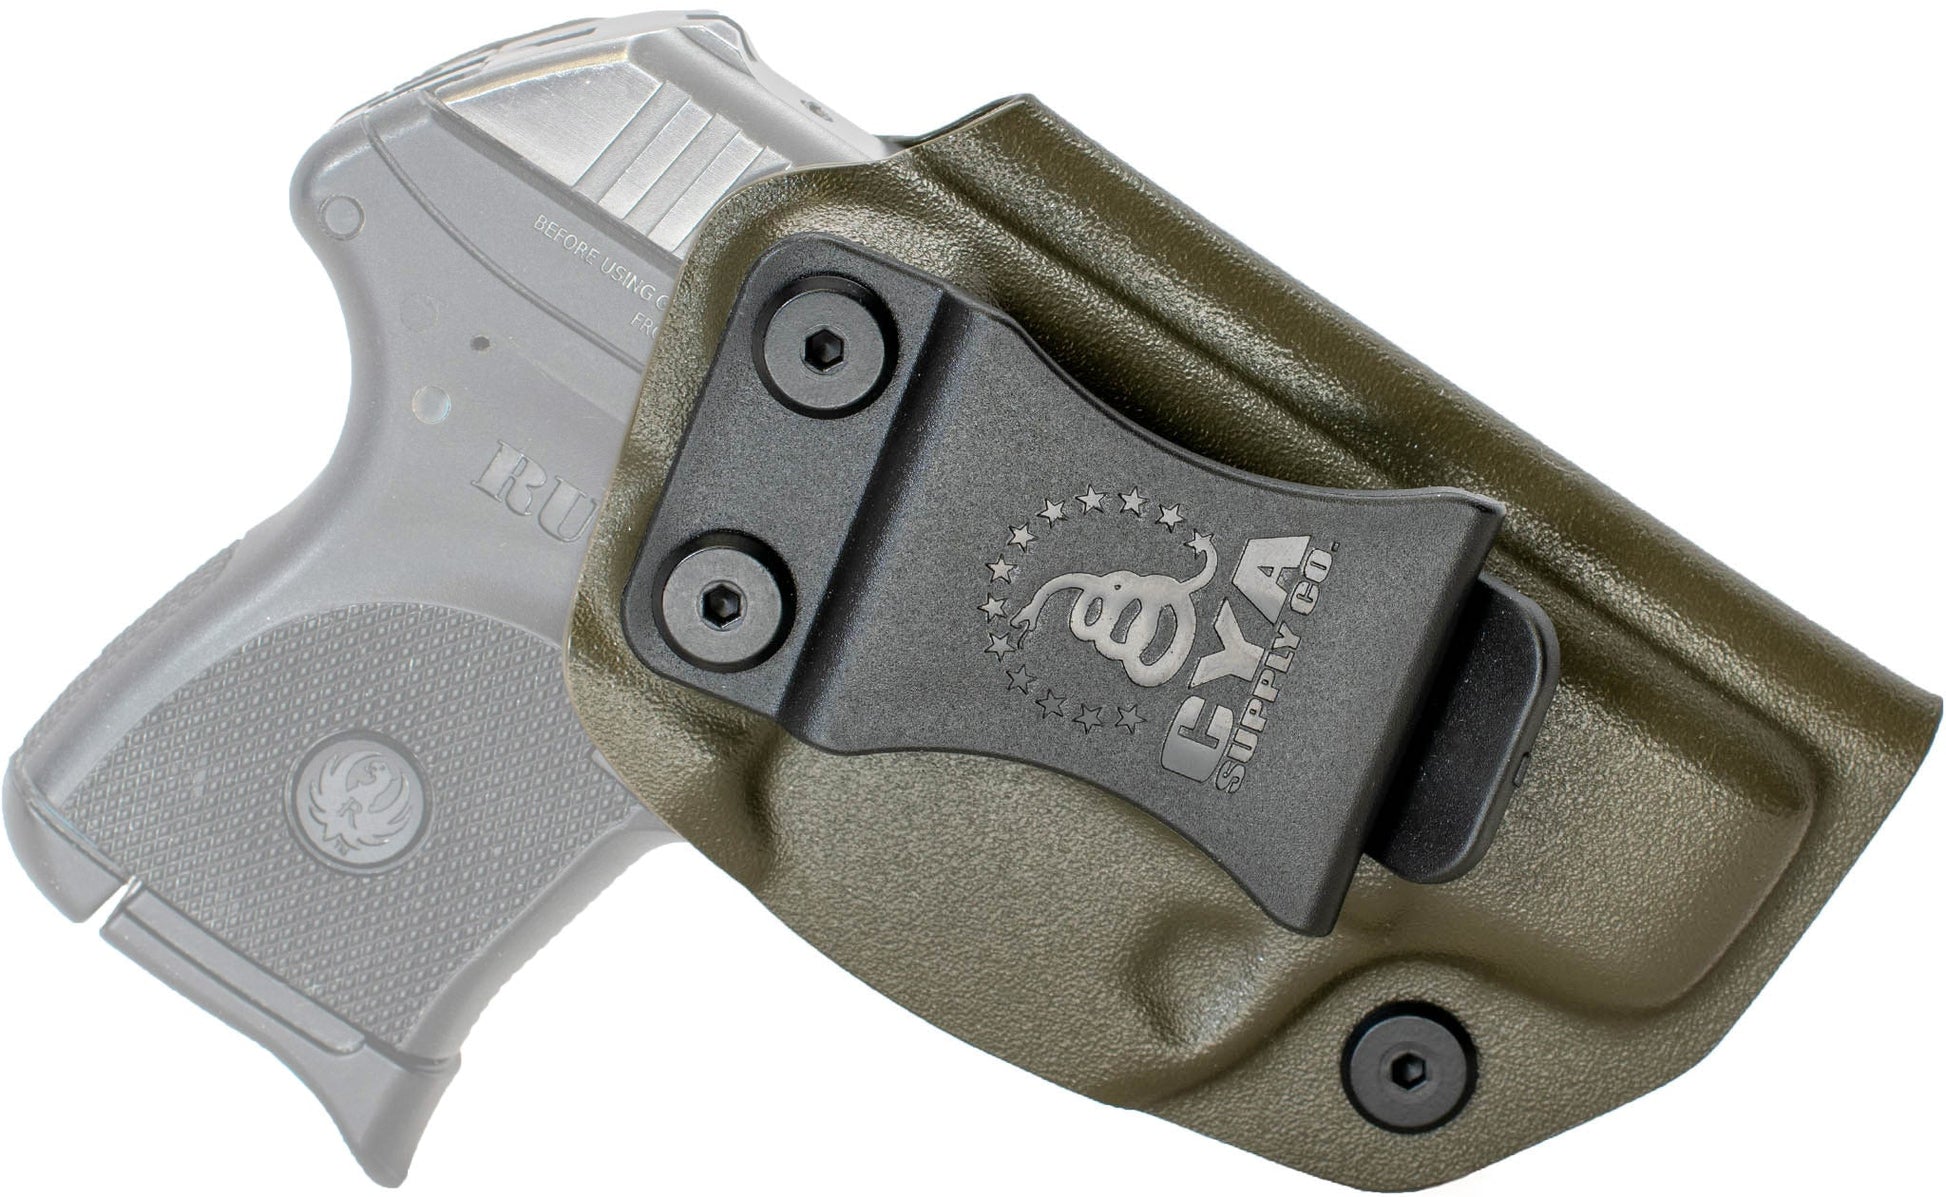 Lcp Ruger 380 Holster - 380 Holster Kydex Iwb Concealed Carry